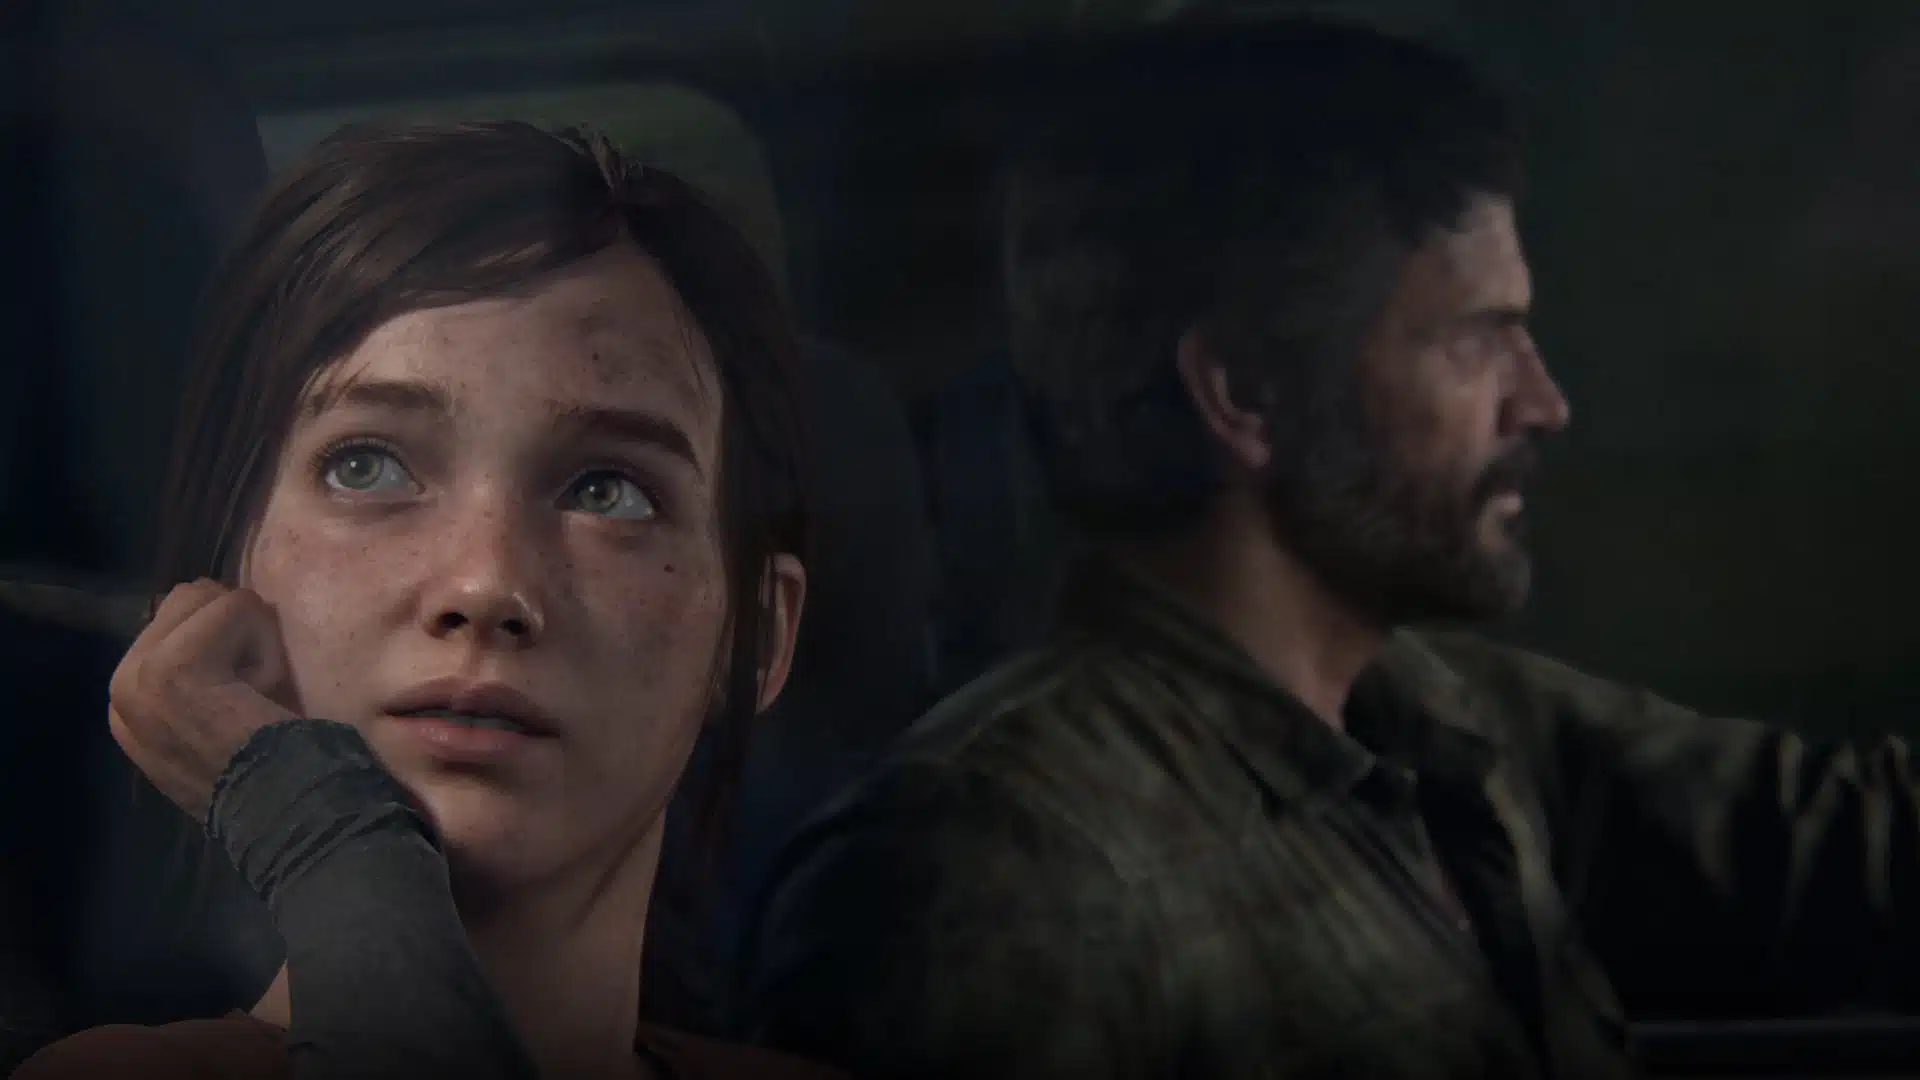 The Last of Us Part 1 PC